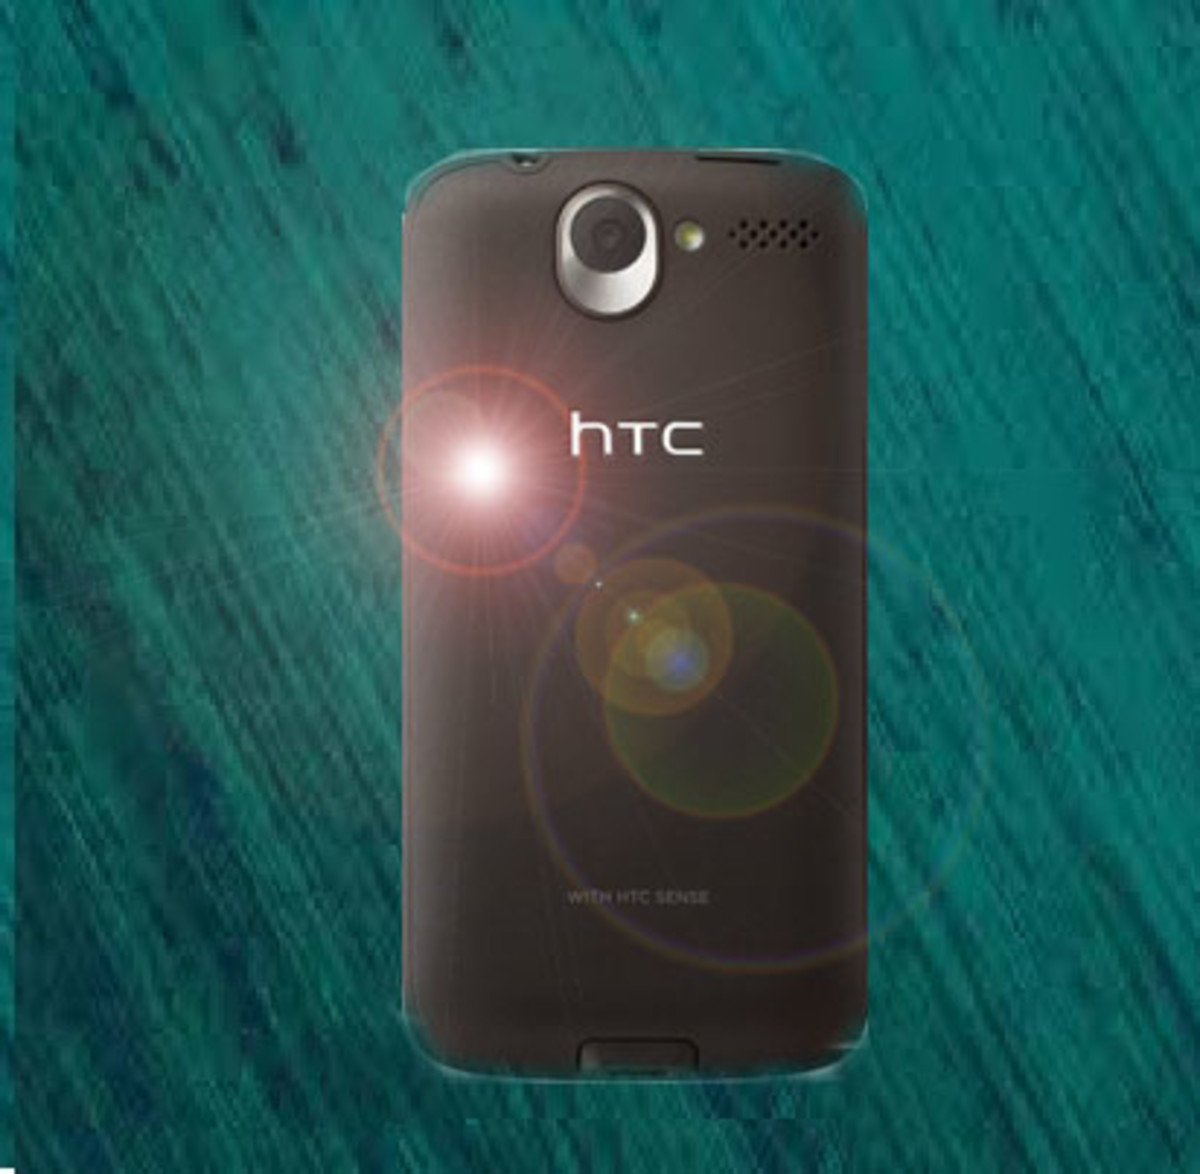 htc-desire-update-with-android-ice-cream-sandwich-ics-or-android-40